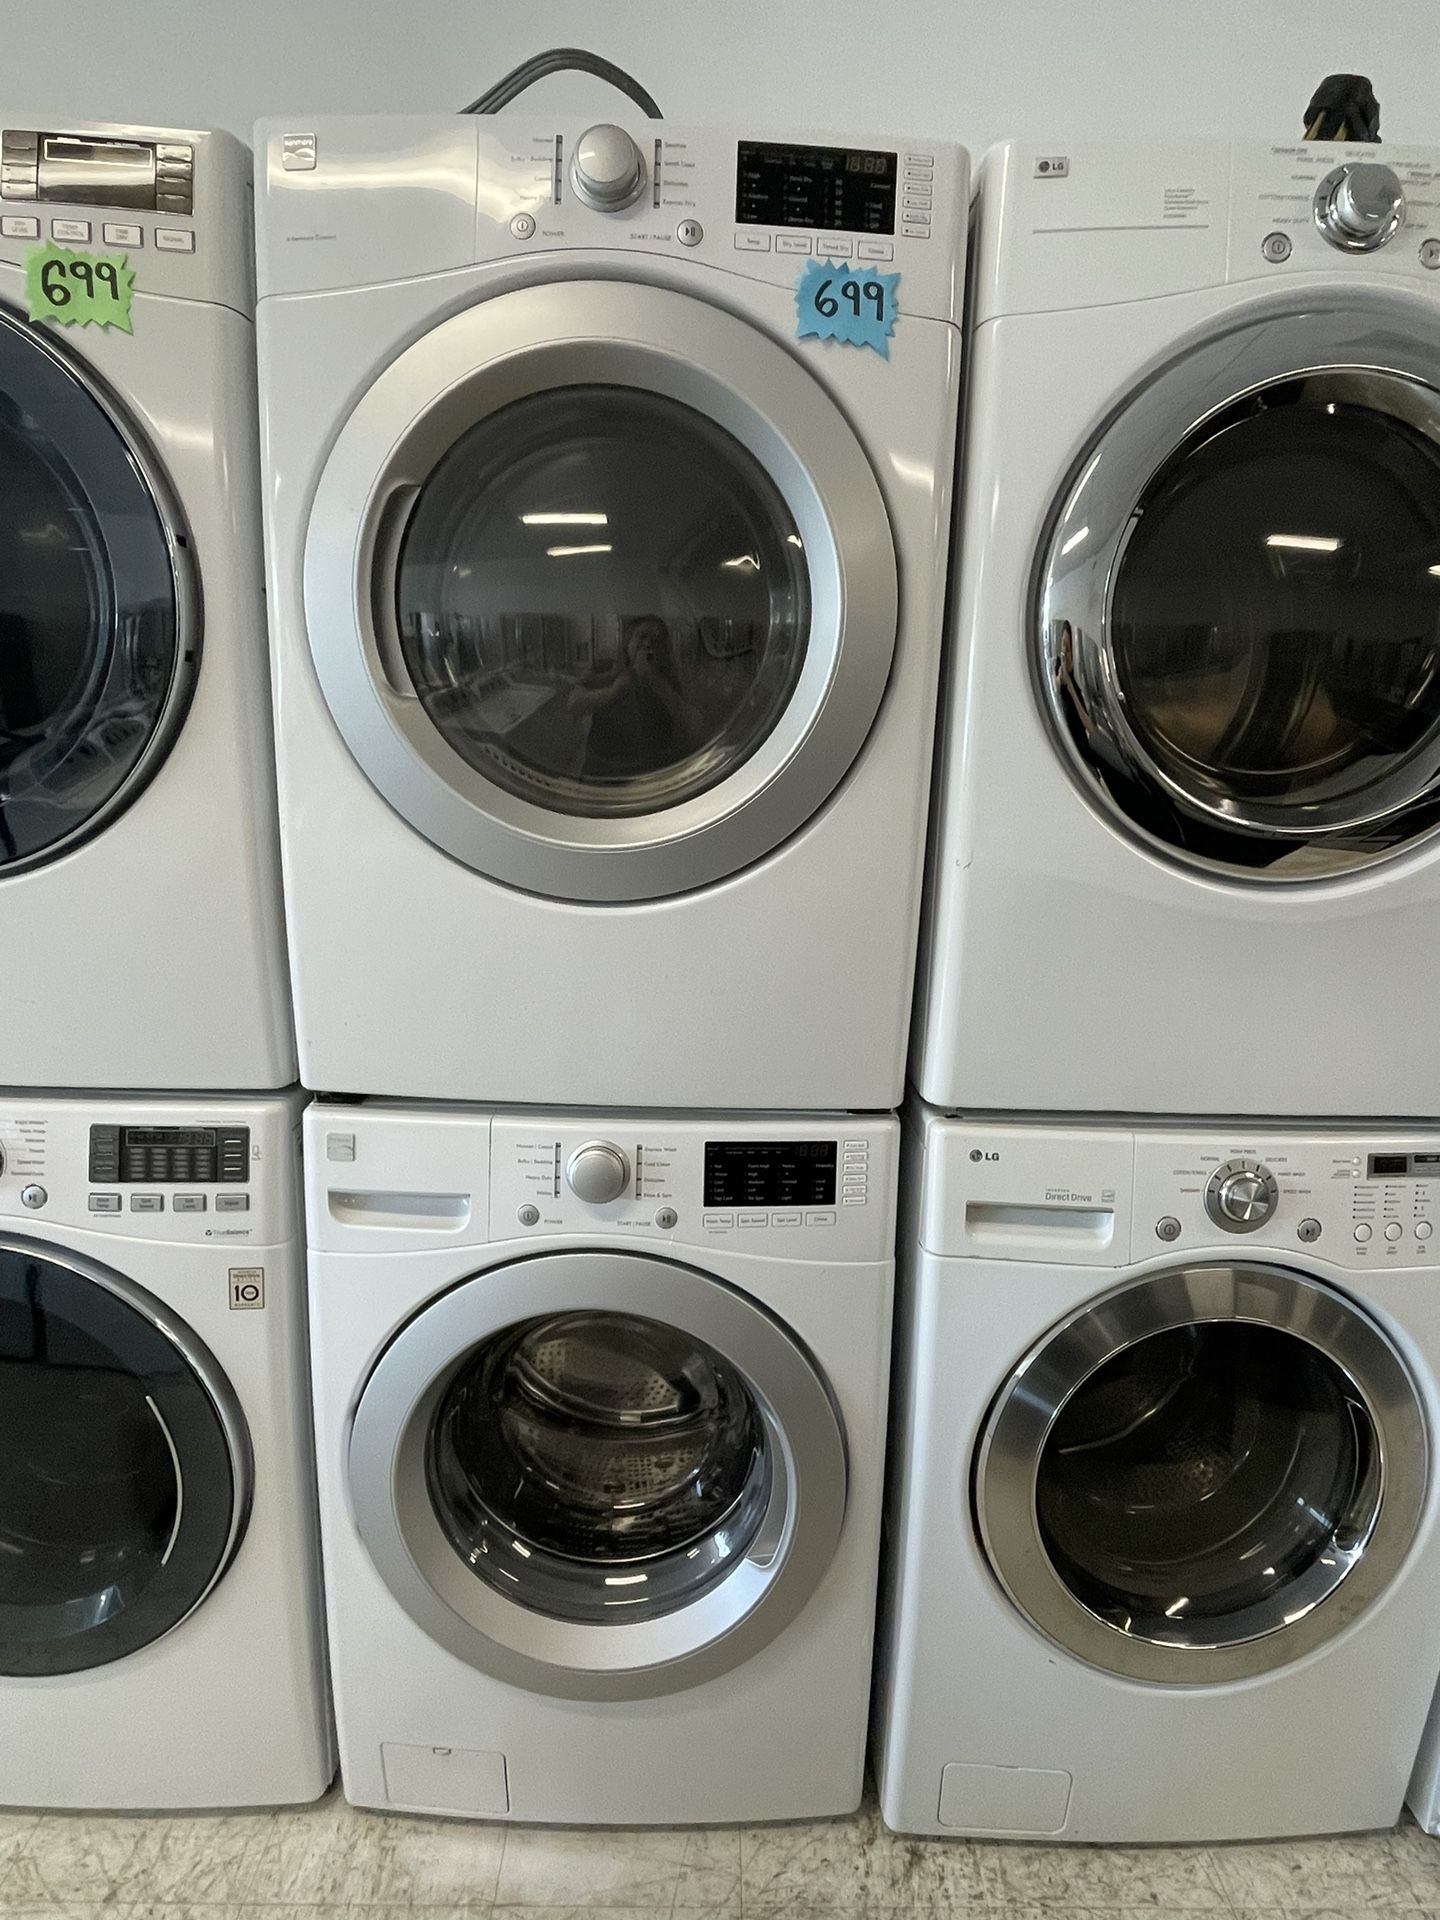 Kenmore Front Load Washer And Electric Dryer Set Used In Good Condition With 90days Warranty 